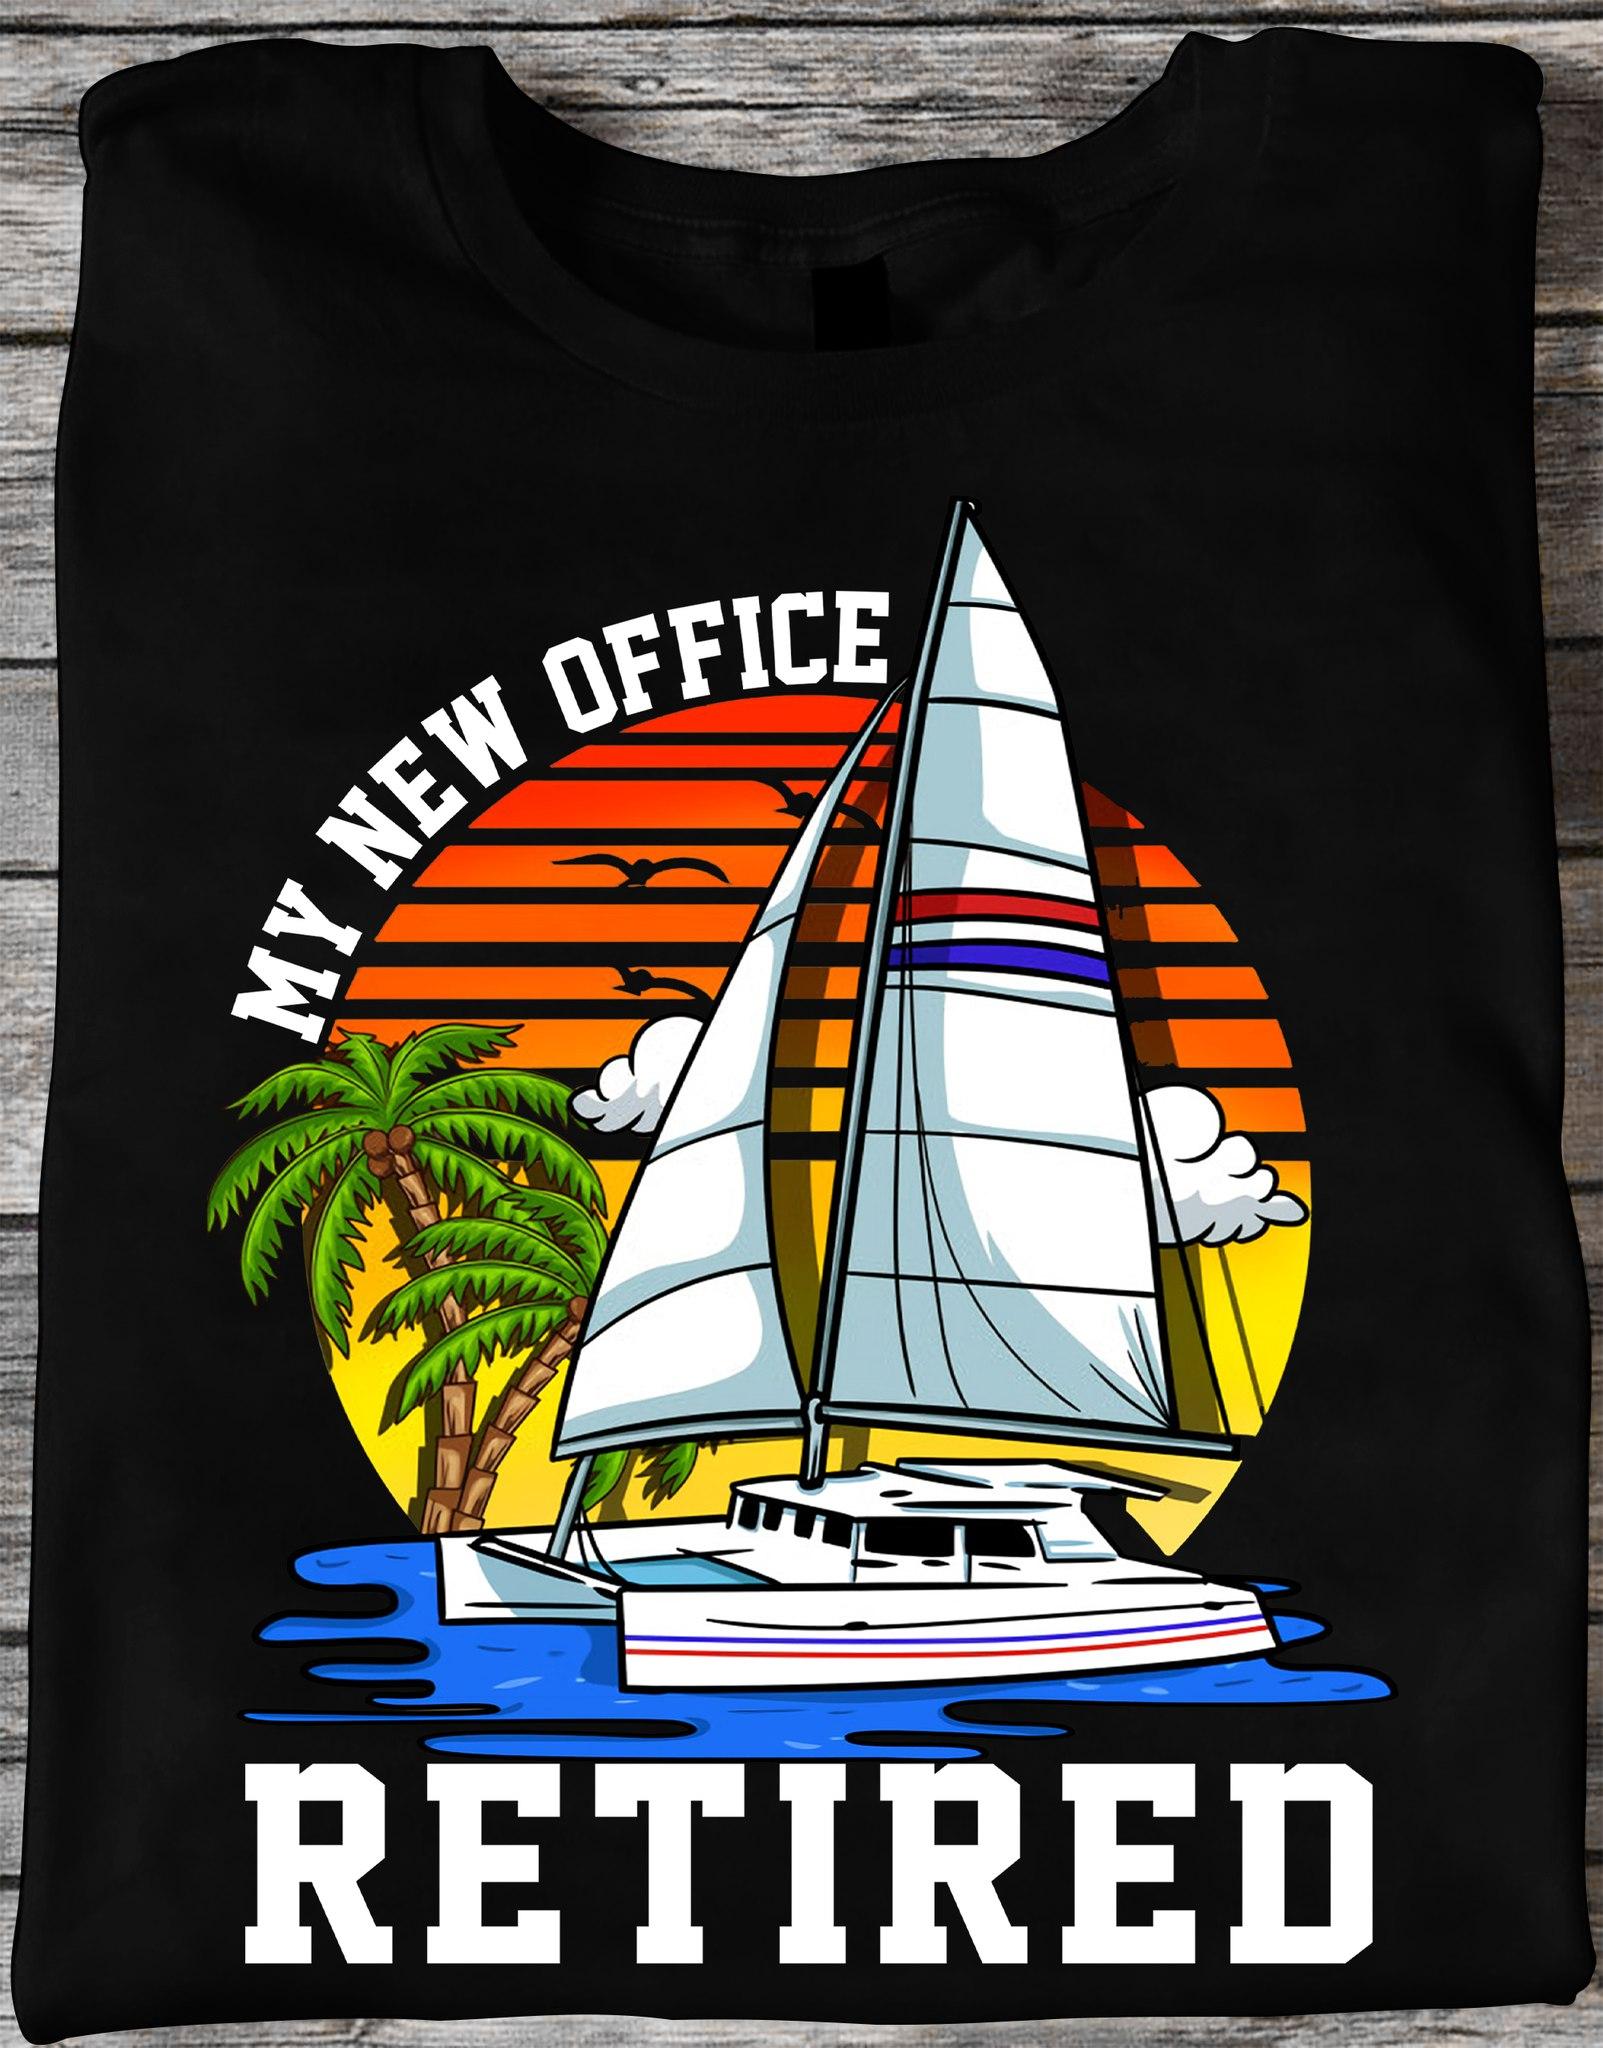 My new office retired - Retirement plan on sailing, gift for retired people